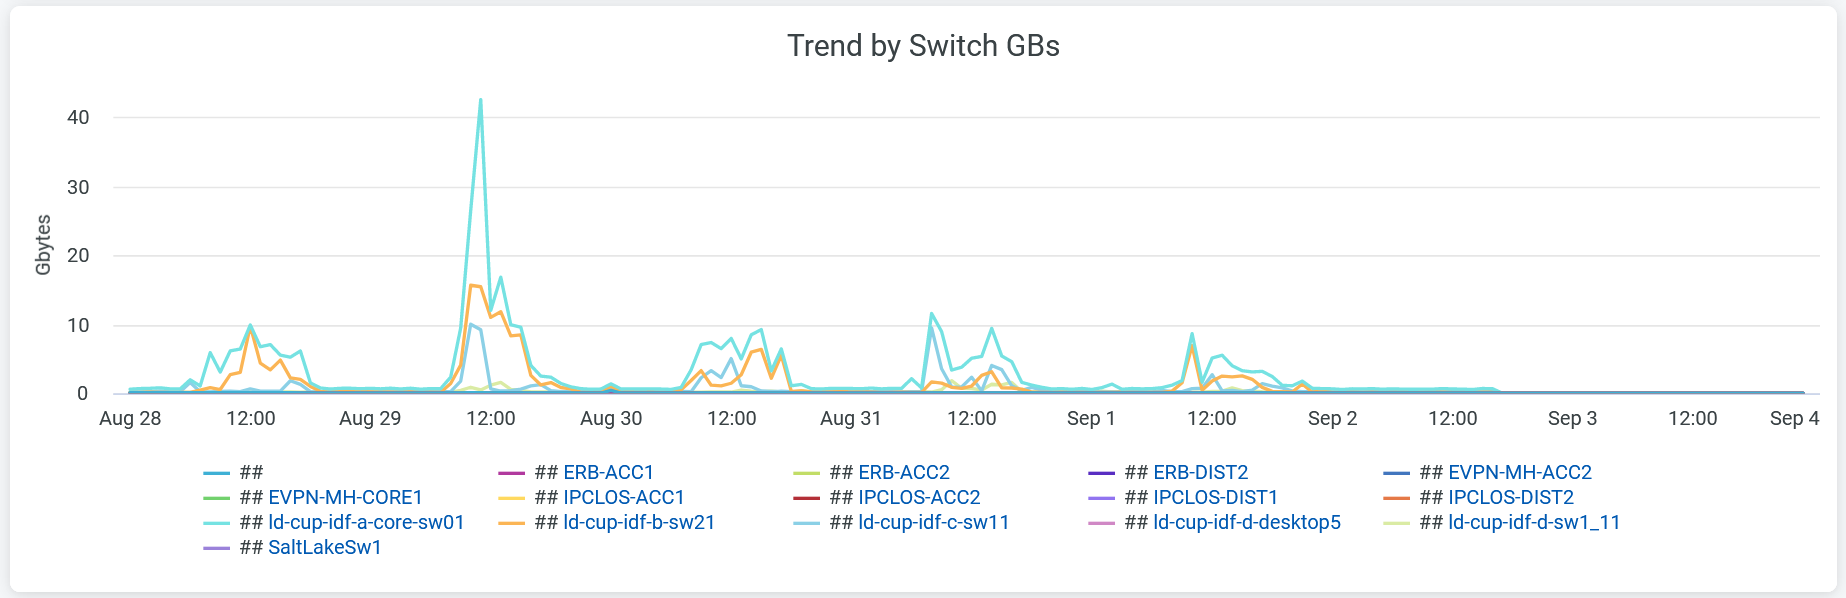 Trend by Switch GBs